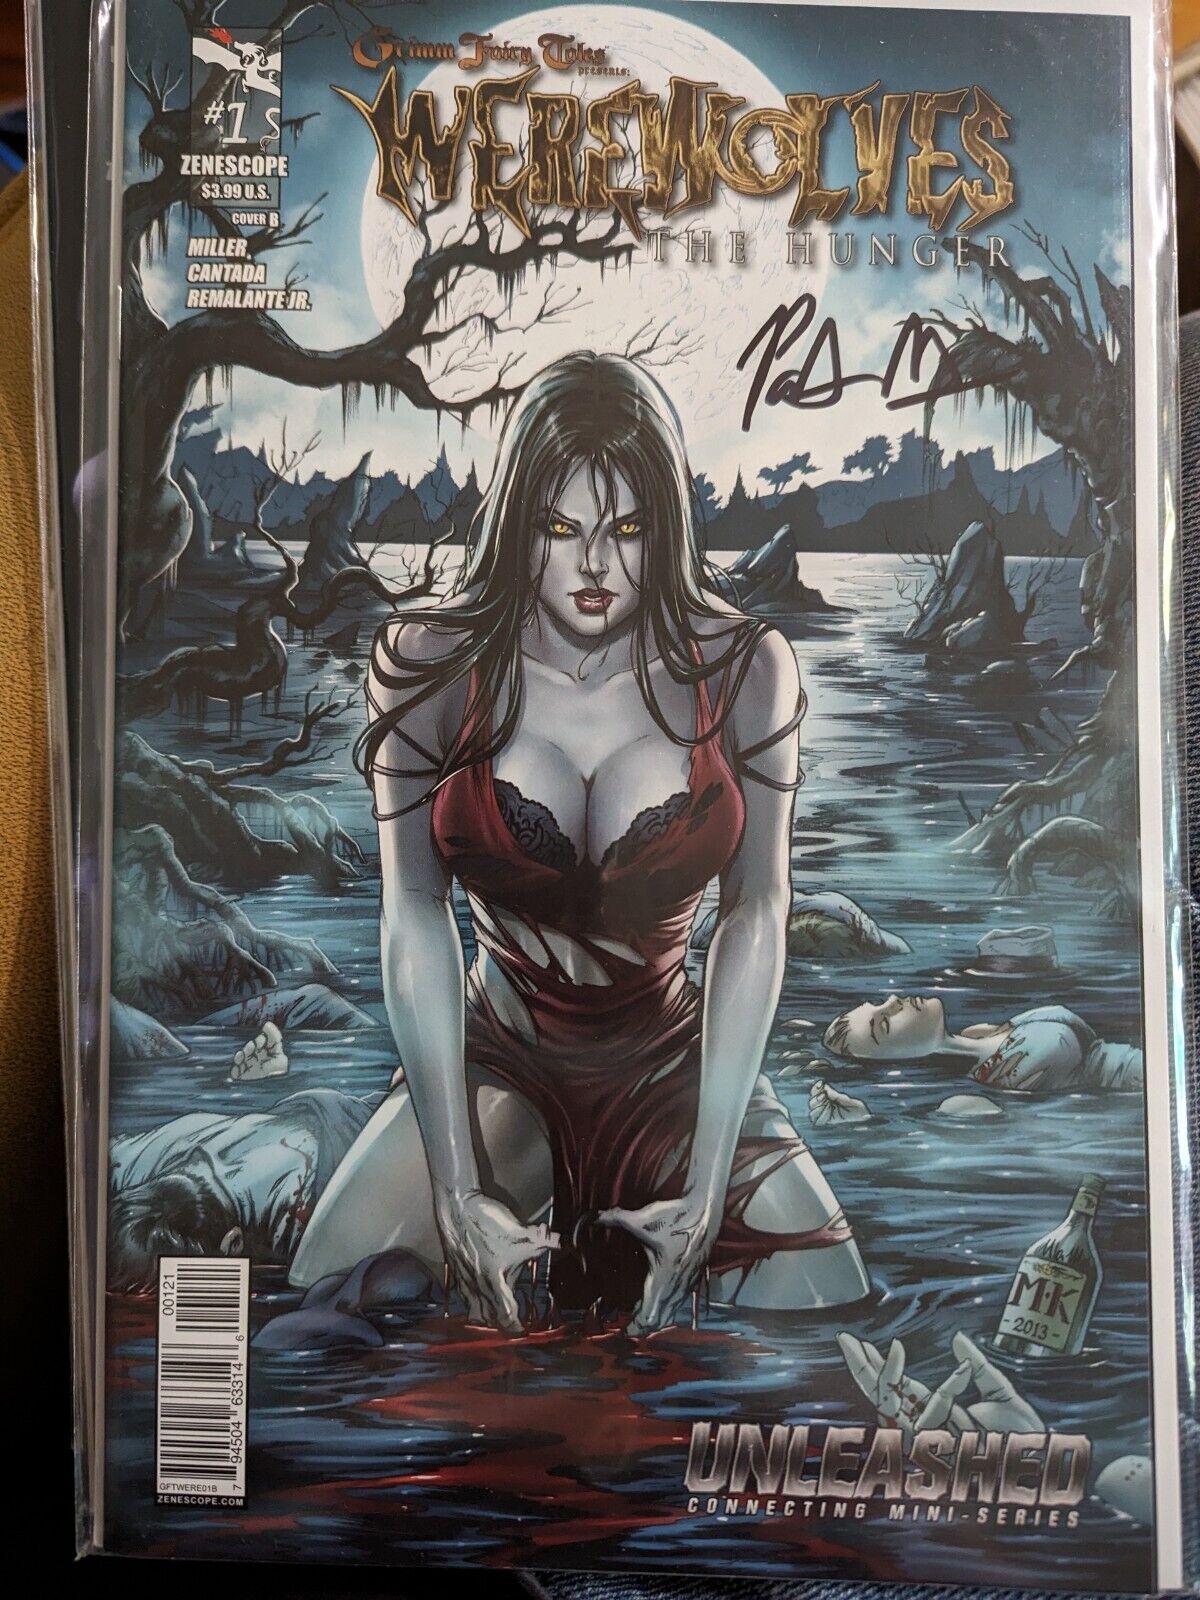 Zenescope Presents Werewolves: The Hunger #1 Cover B Variant (Signed)